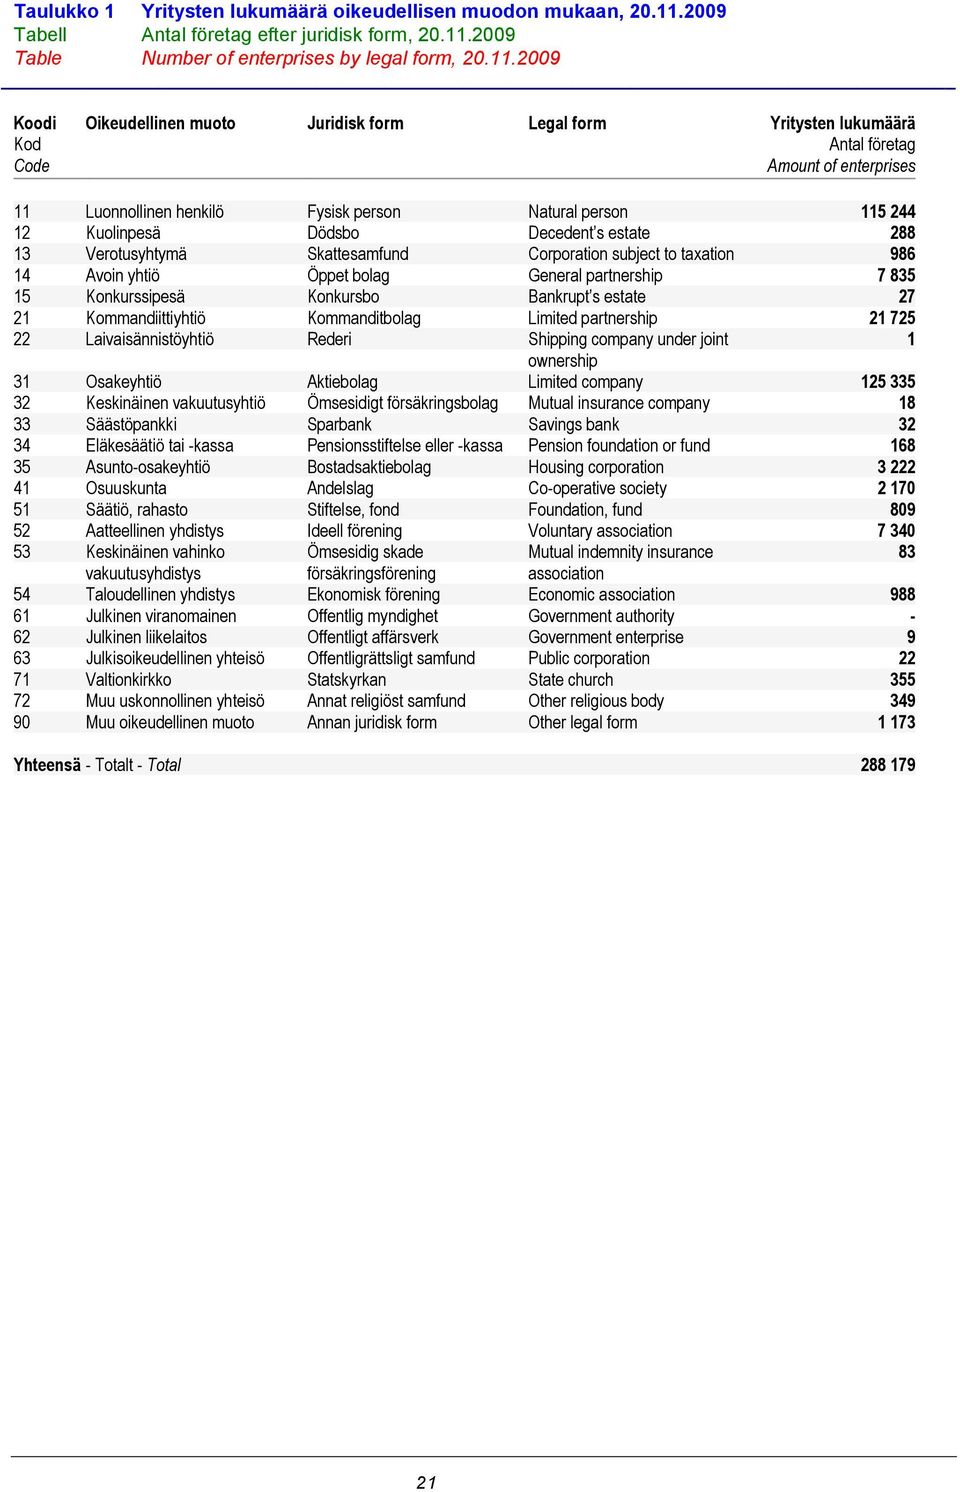 2009 Table Number of enterprises by legal form, 20.11.